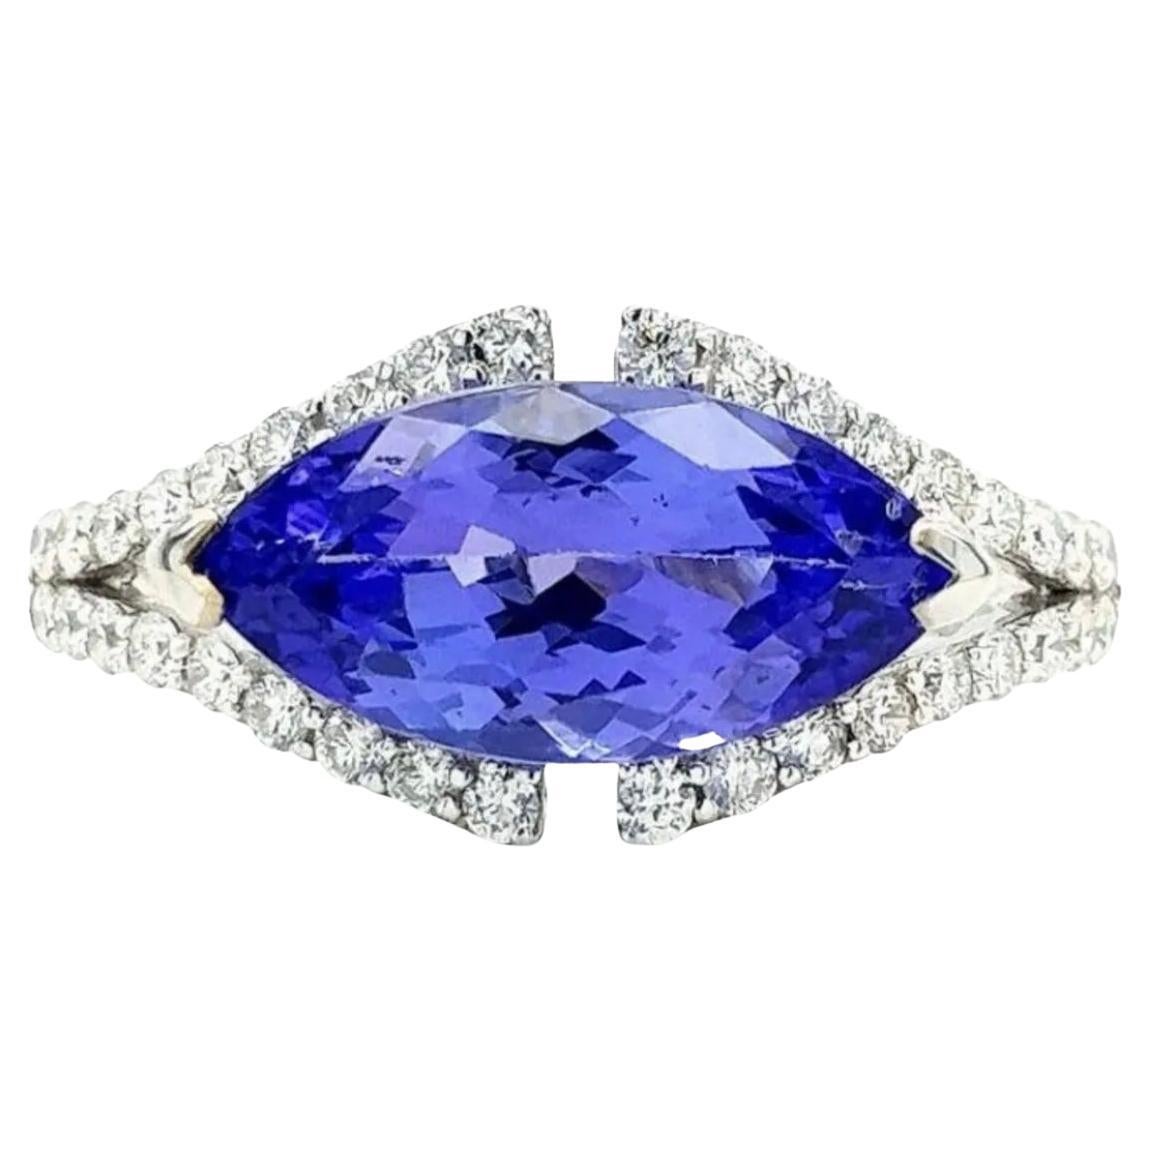 Authentic 18k 2.42 Ct Tanzanite & .39 Ct Diamond Ring with Appraisal Report Inc